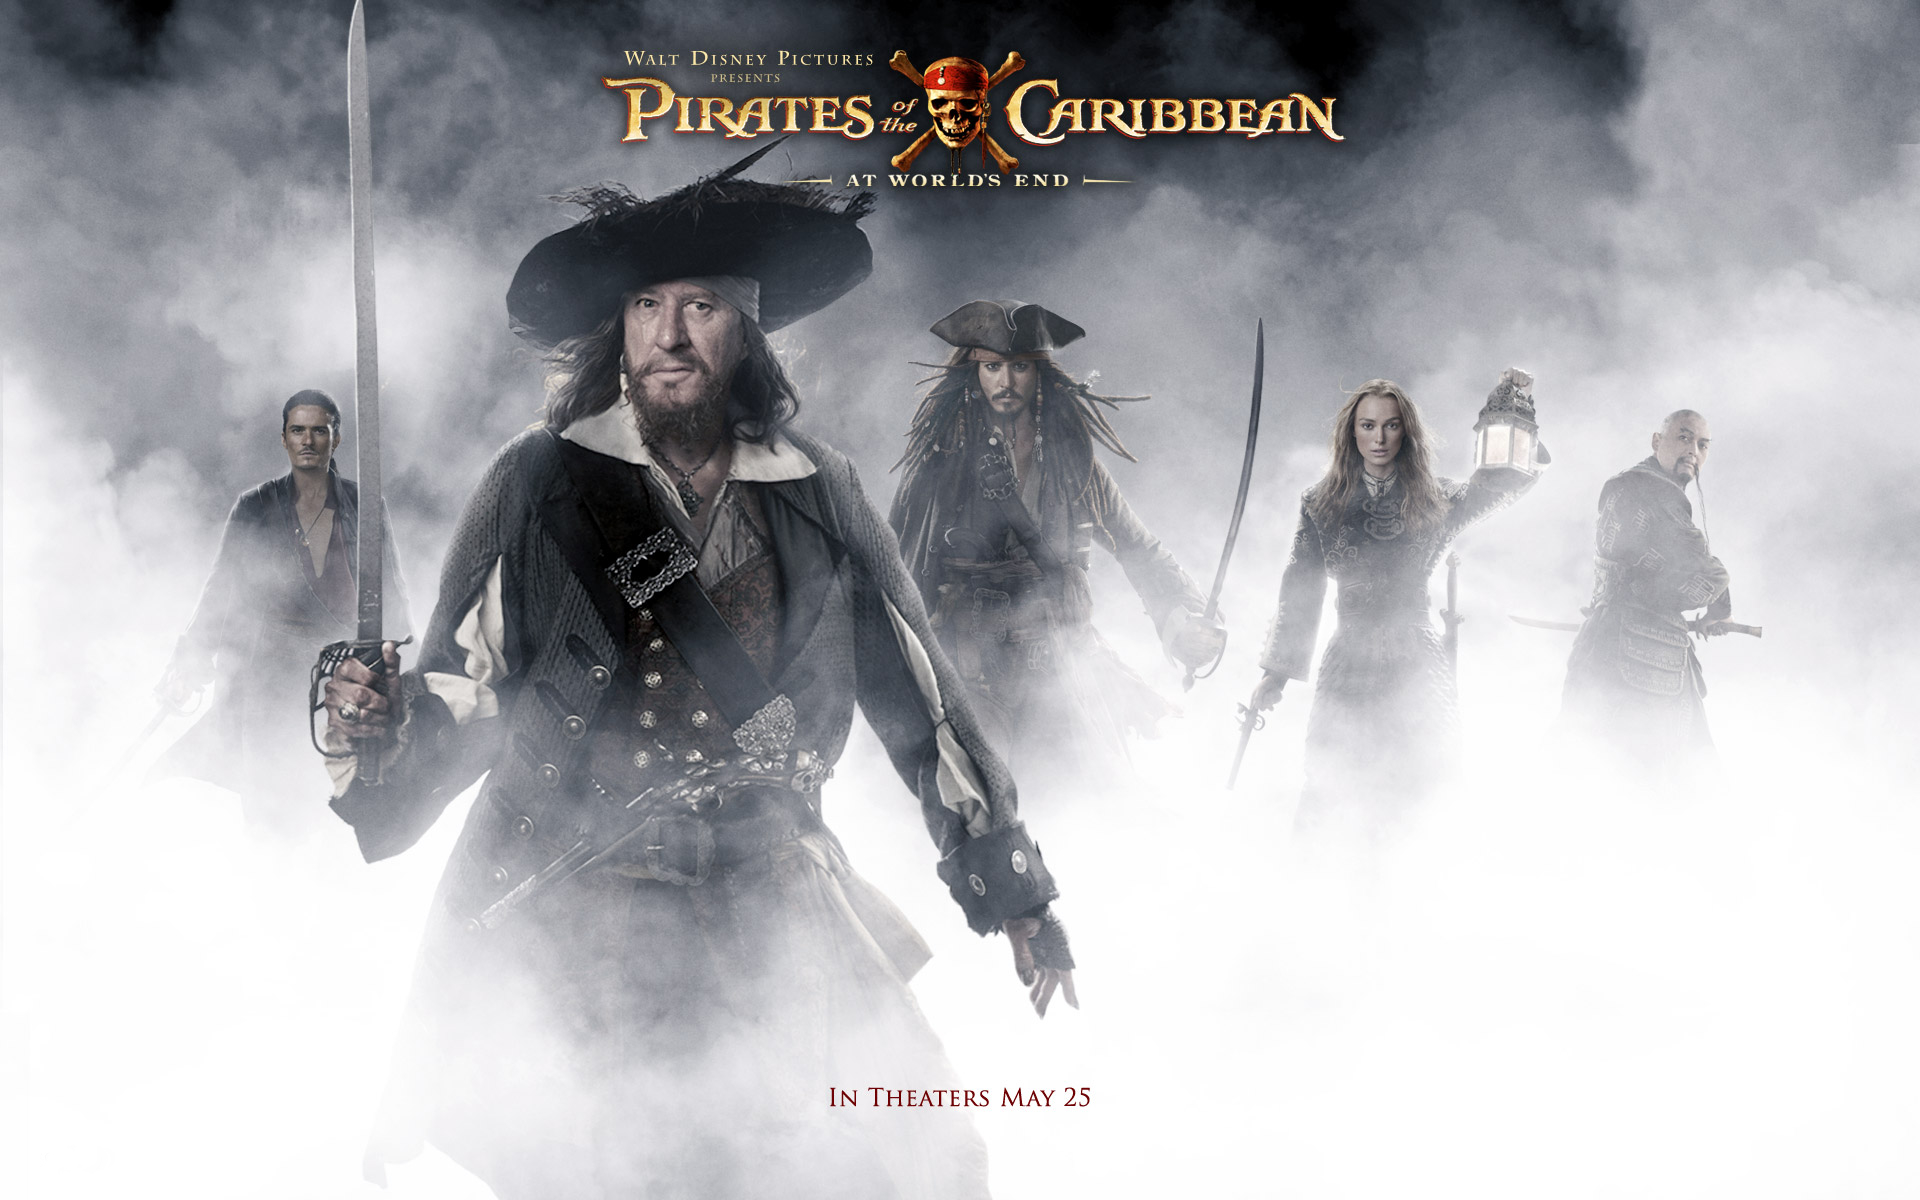 movie, pirates of the caribbean: at world's end, captain sao feng, chow yun fat, elizabeth swann, geoffrey rush, hector barbossa, jack sparrow, johnny depp, keira knightley, orlando bloom, will turner, pirates of the caribbean